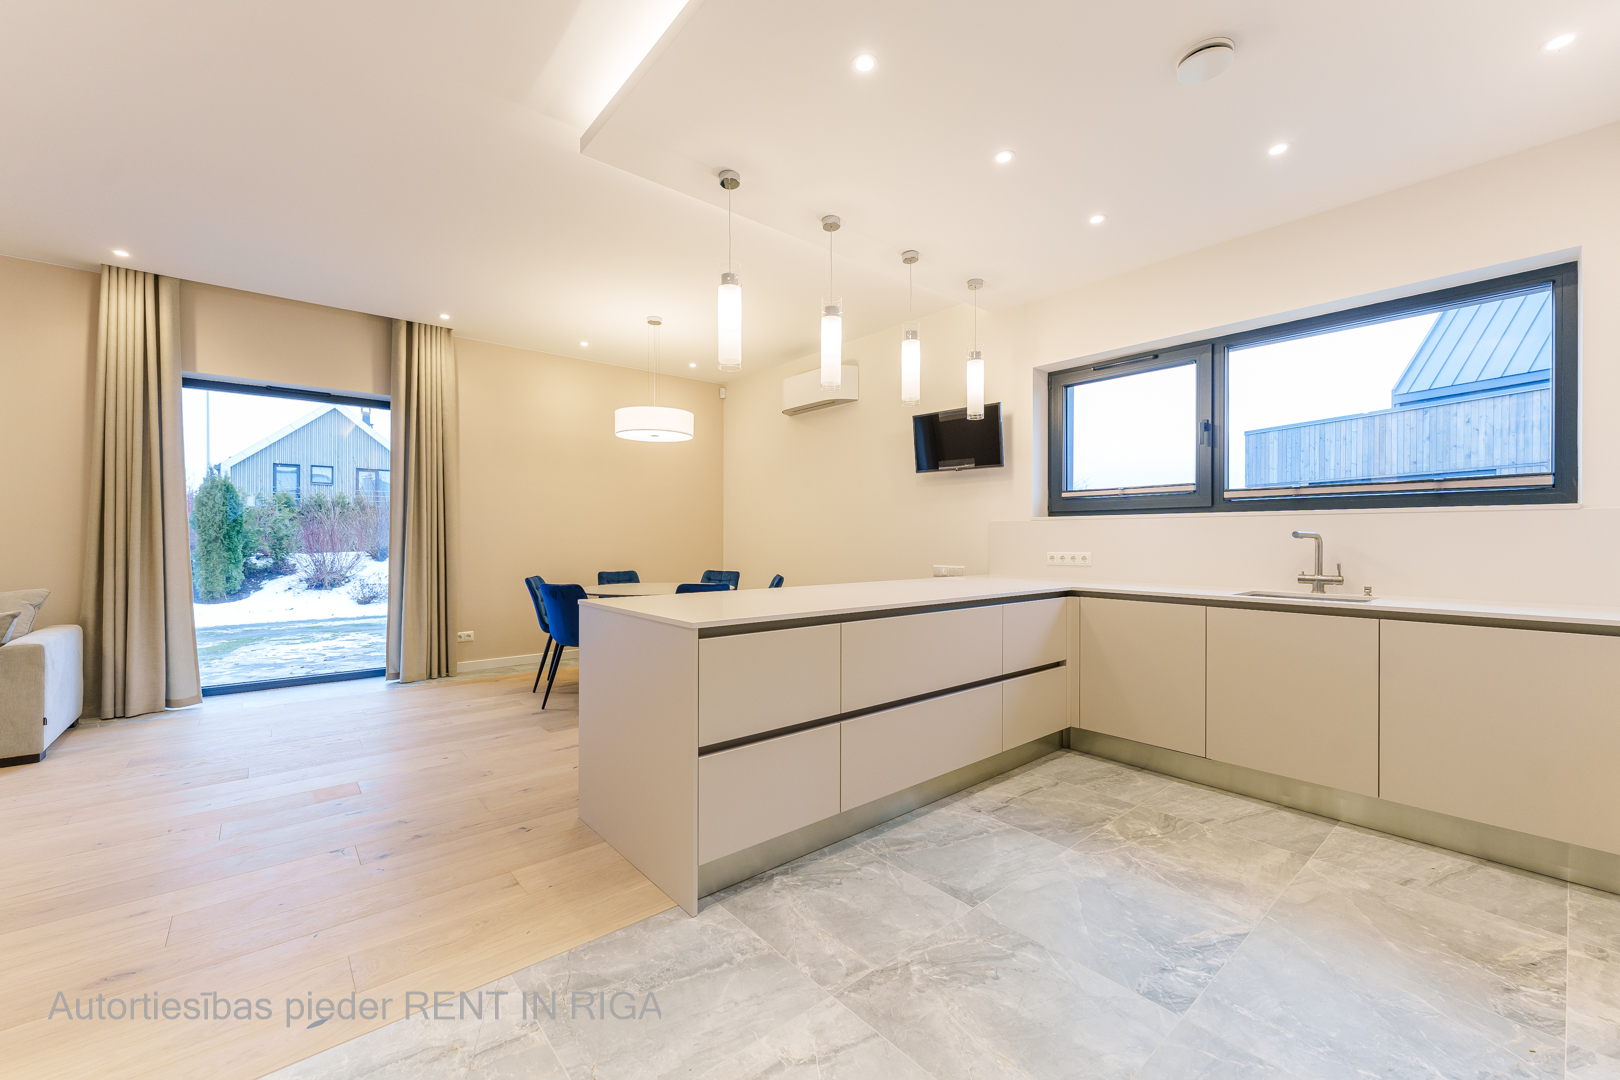 House for rent, Jomas street - Image 1